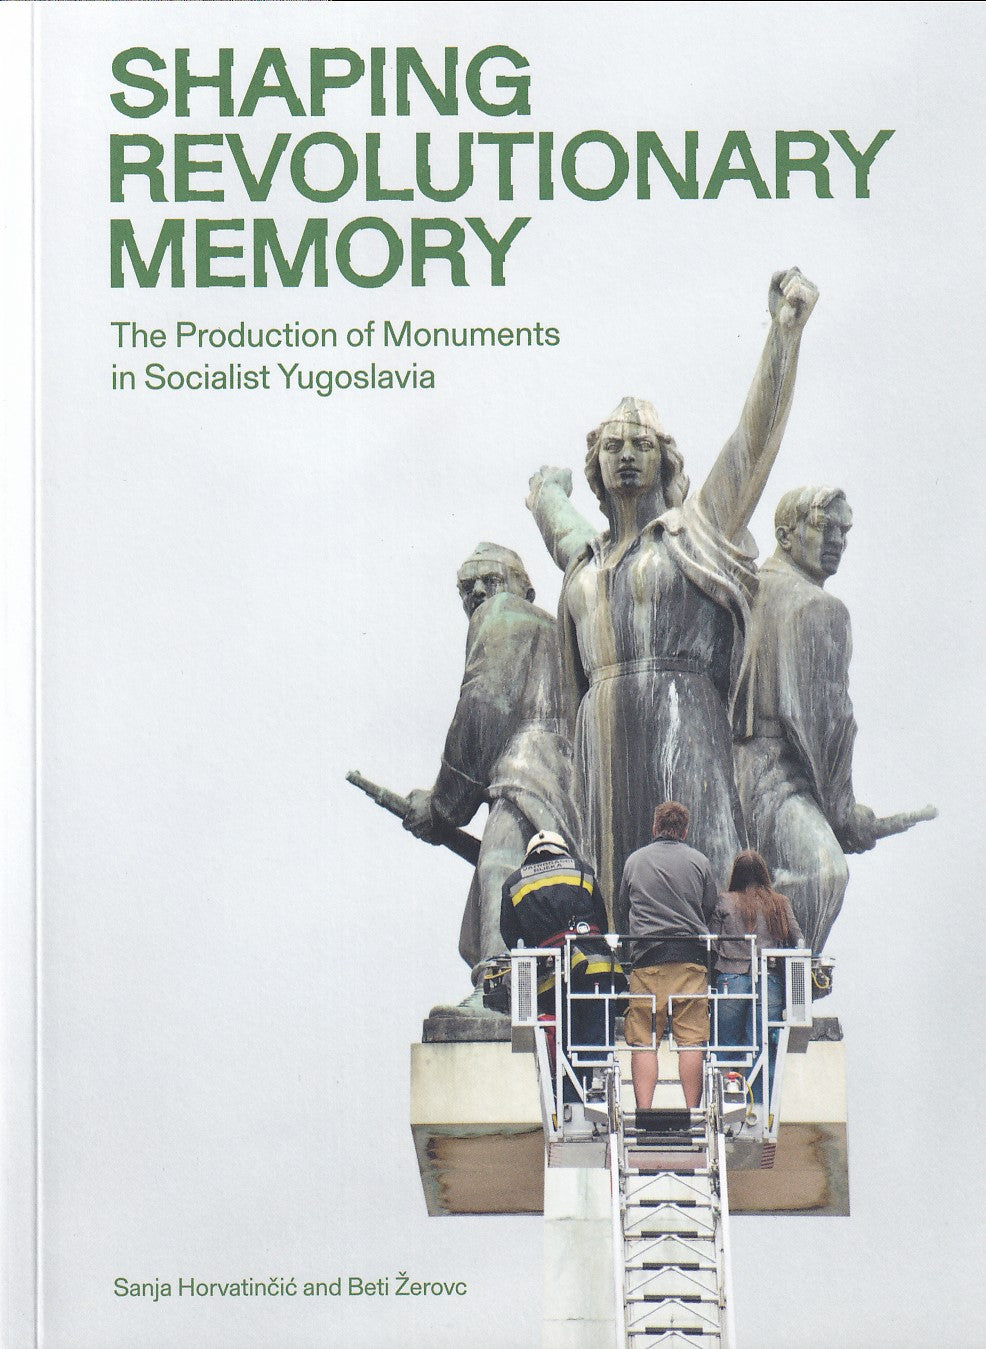 Shaping revolutionary memory: the production of monuments in socialist Yugoslavia